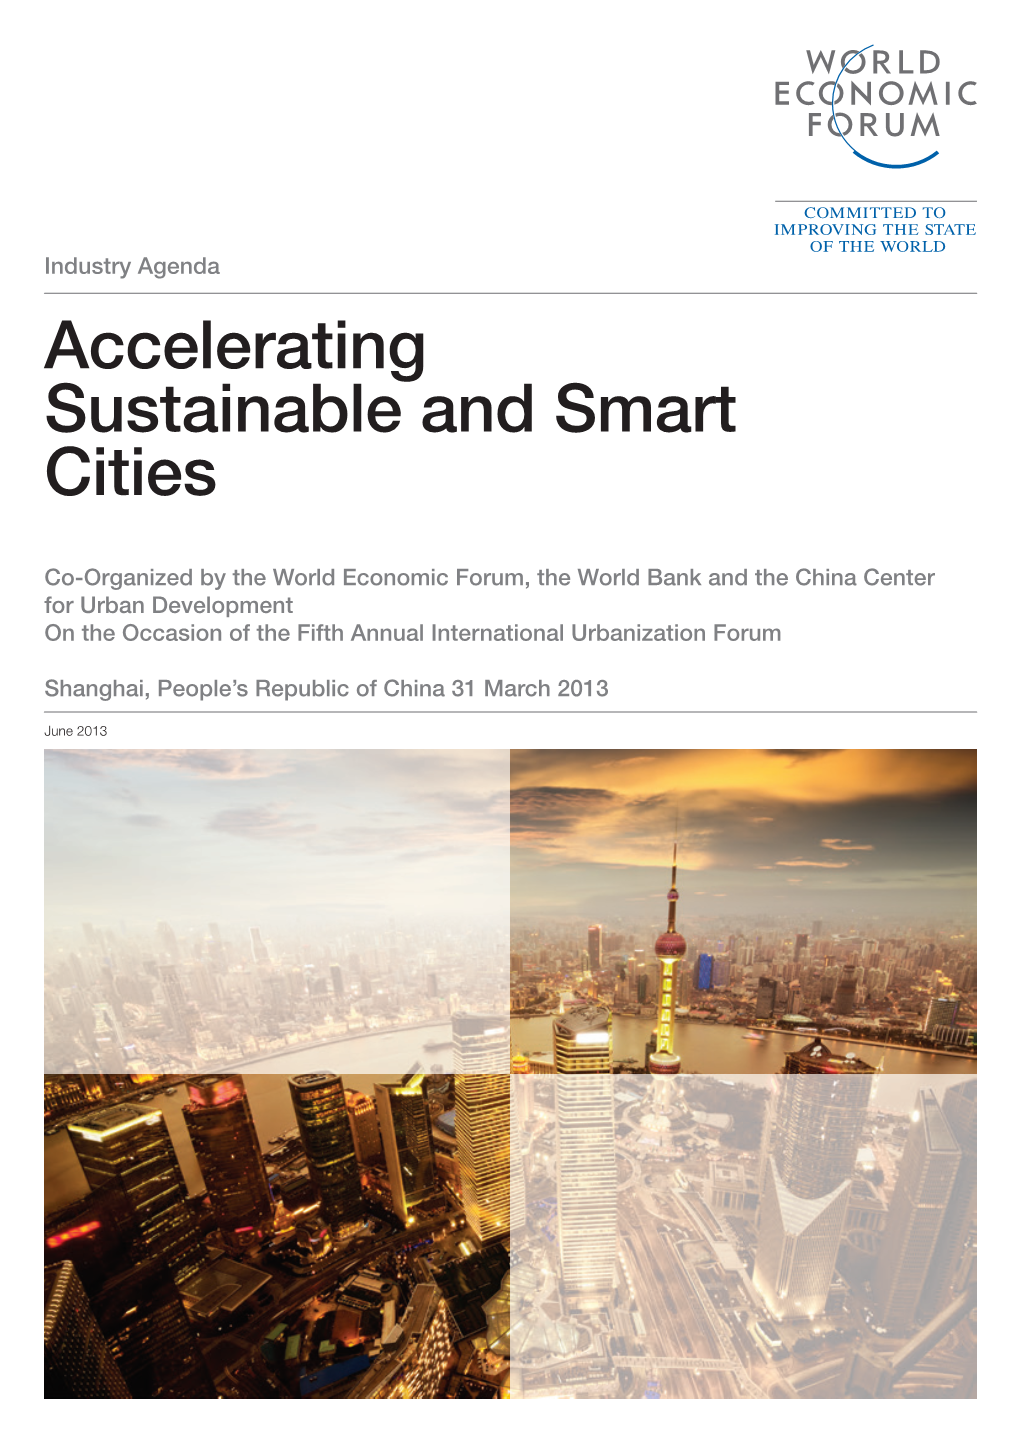 Accelerating Sustainable and Smart Cities